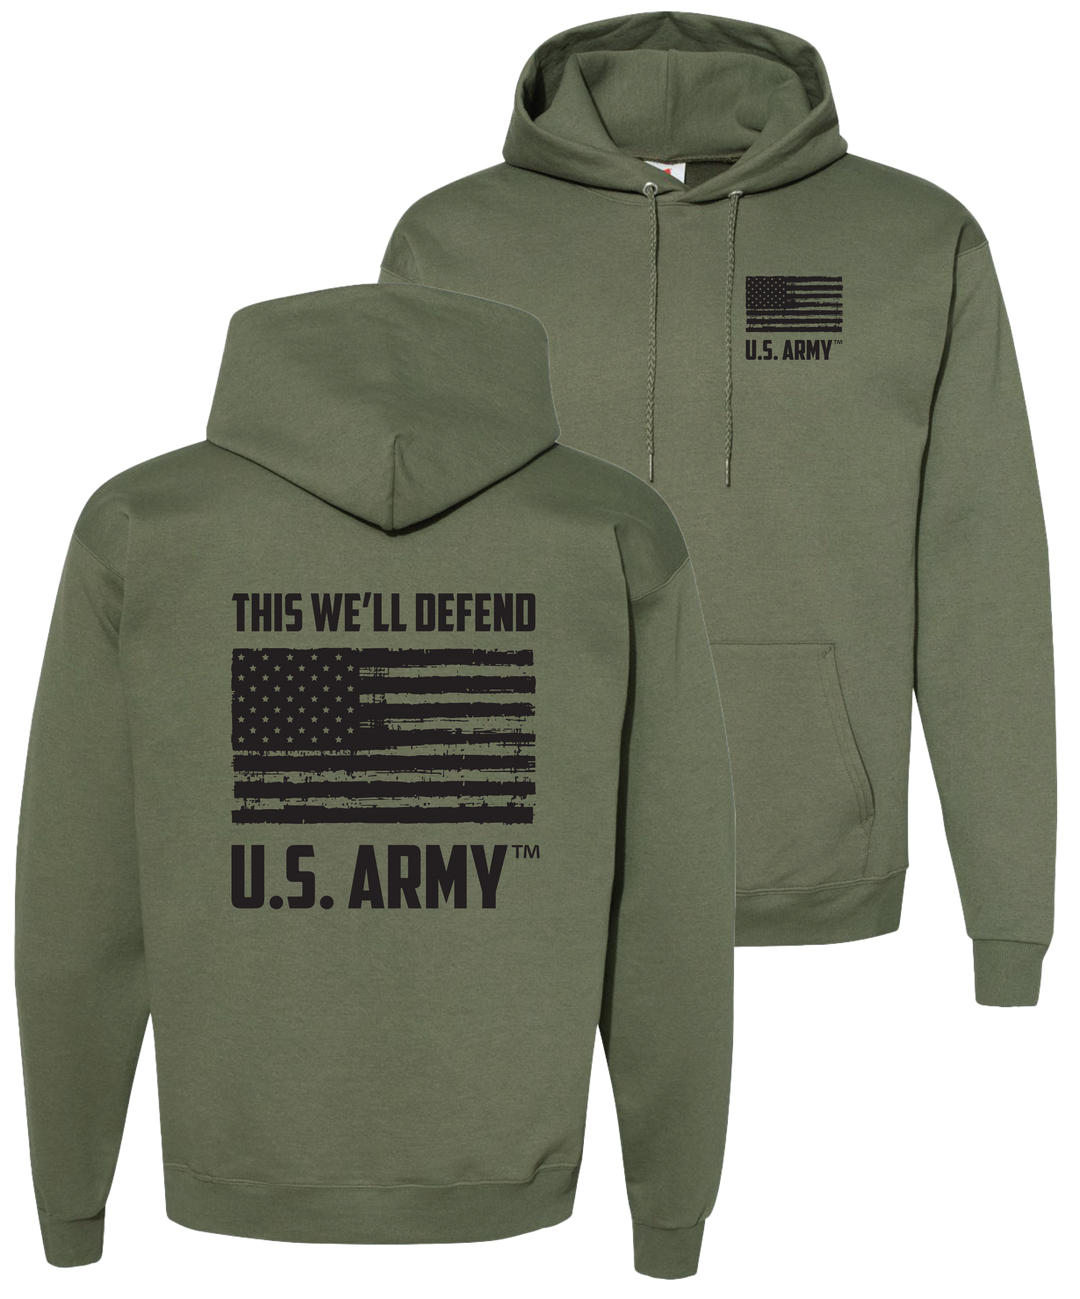 U.S. Army™ This We'll Defend Hoodie (Military Green)